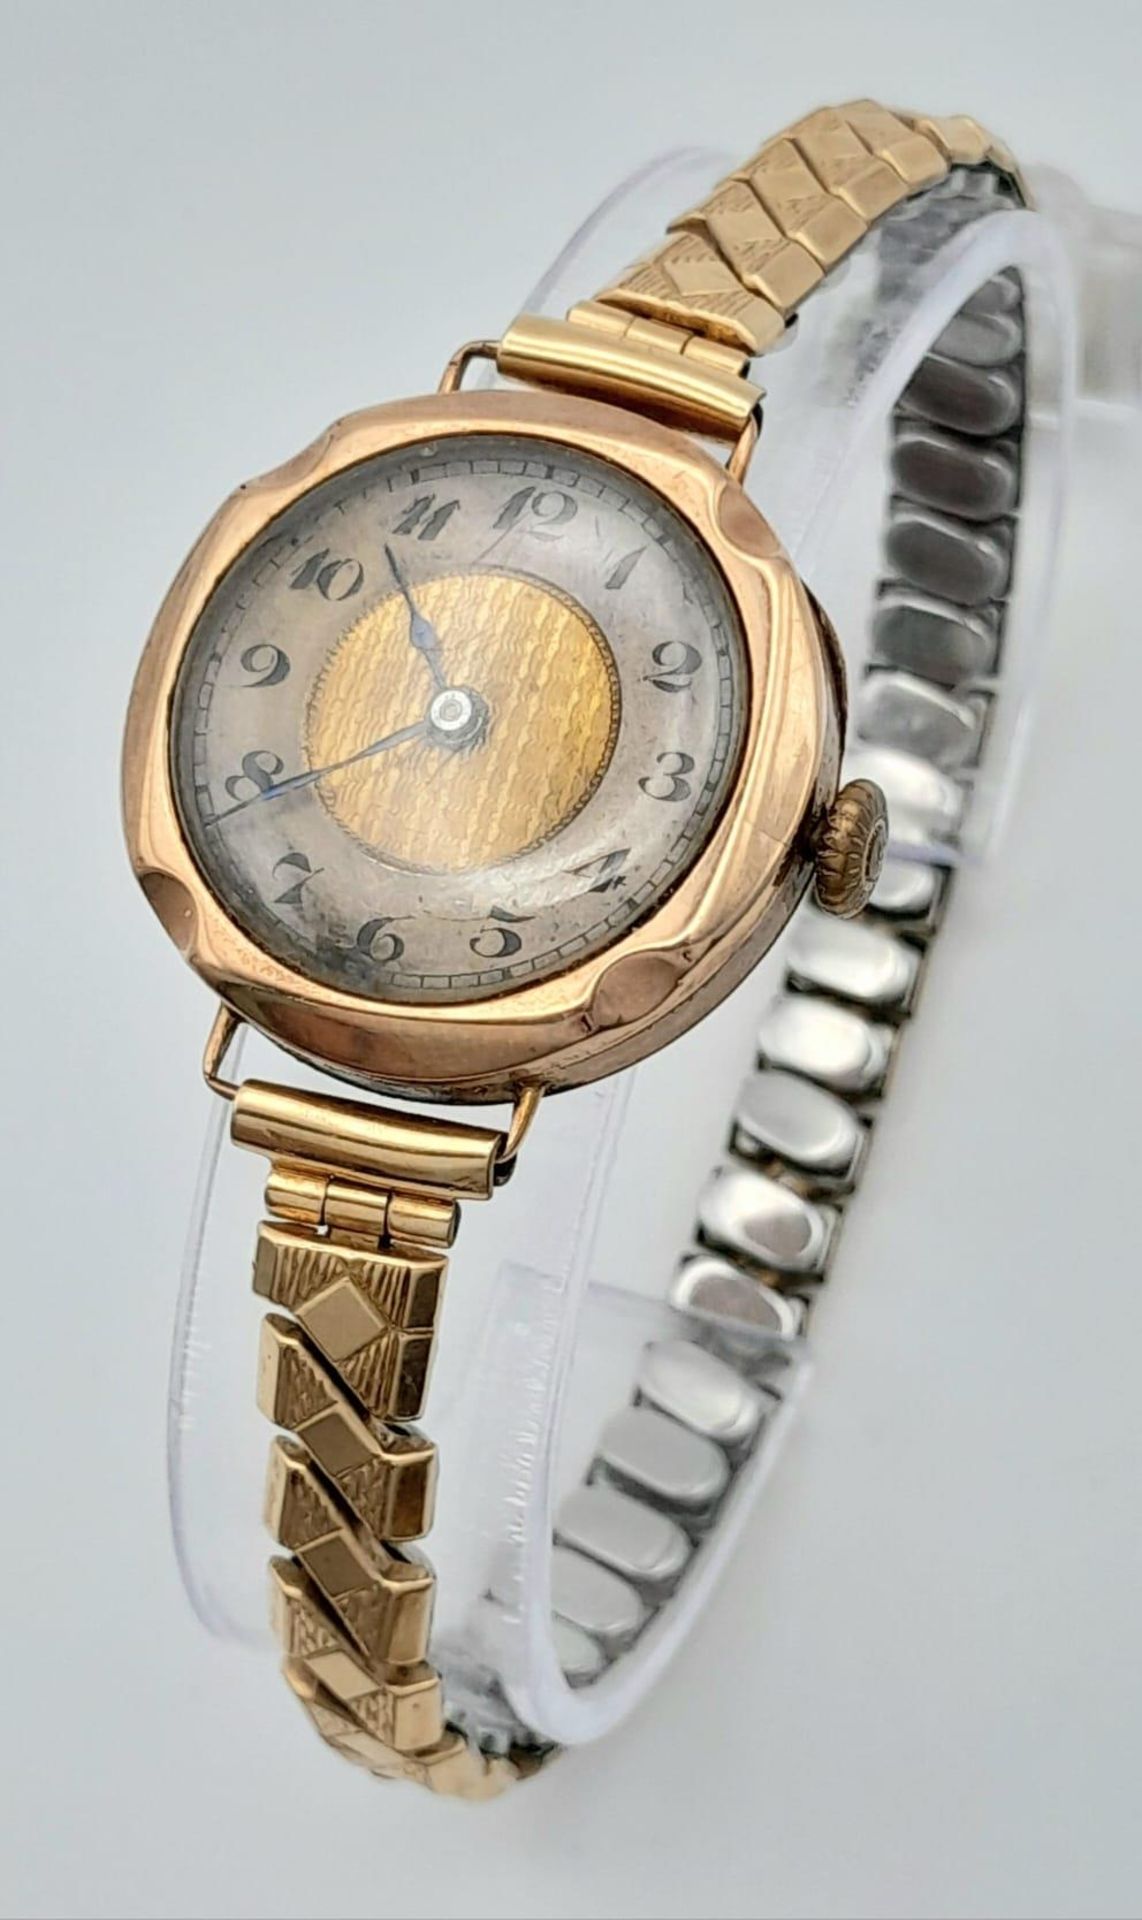 A Vintage 9K Gold Ladies Watch. Expandable gilded bracelet. 9K gold case - 26mm. Gilded dial with